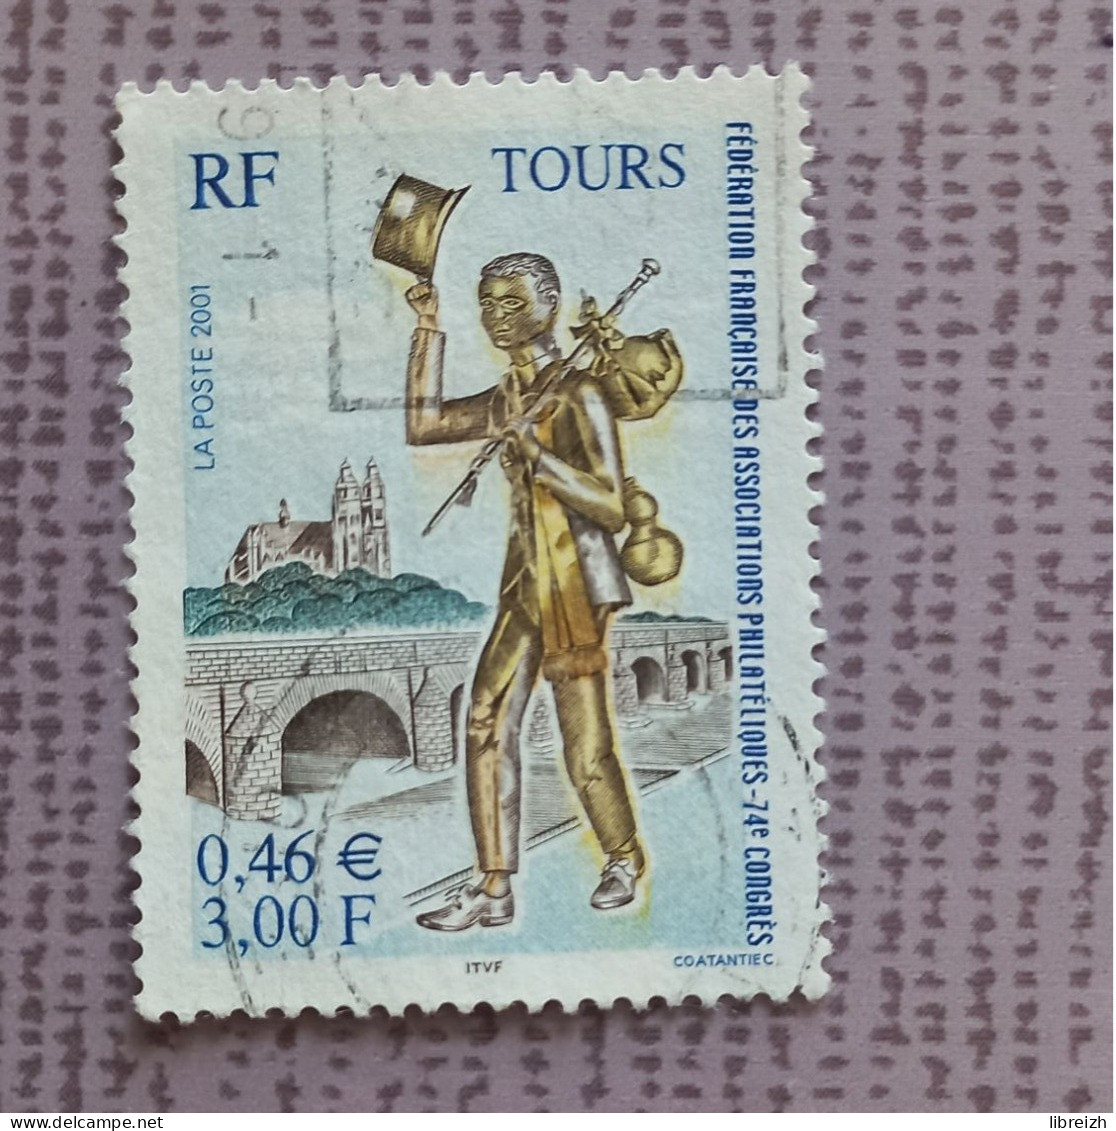 Tours N° 3397  Année 2001 - Used Stamps